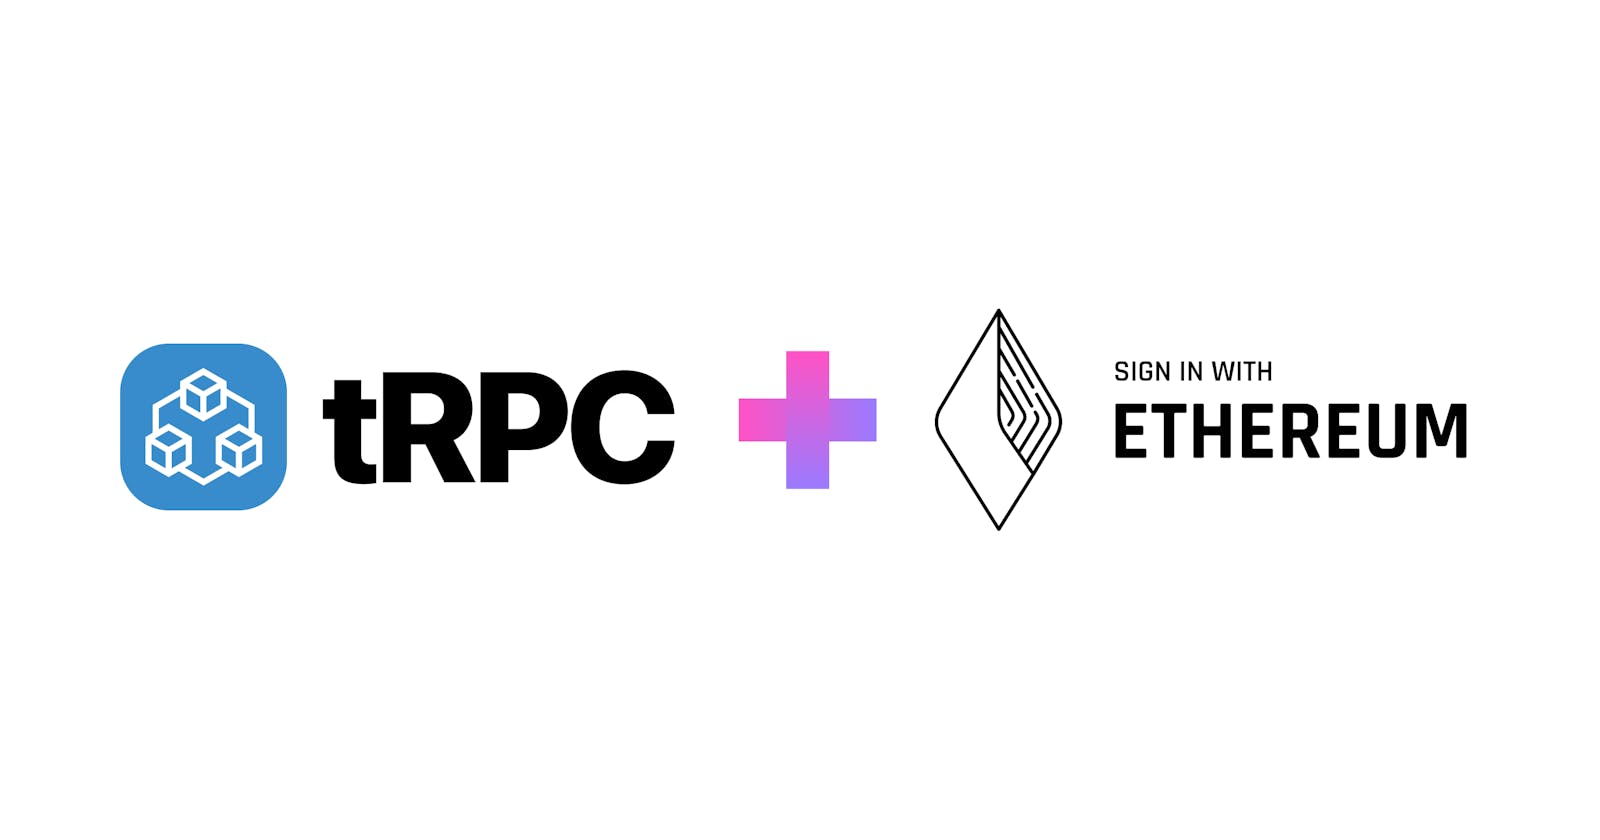 Build A tRPC Sign-In With Ethereum Monorepo